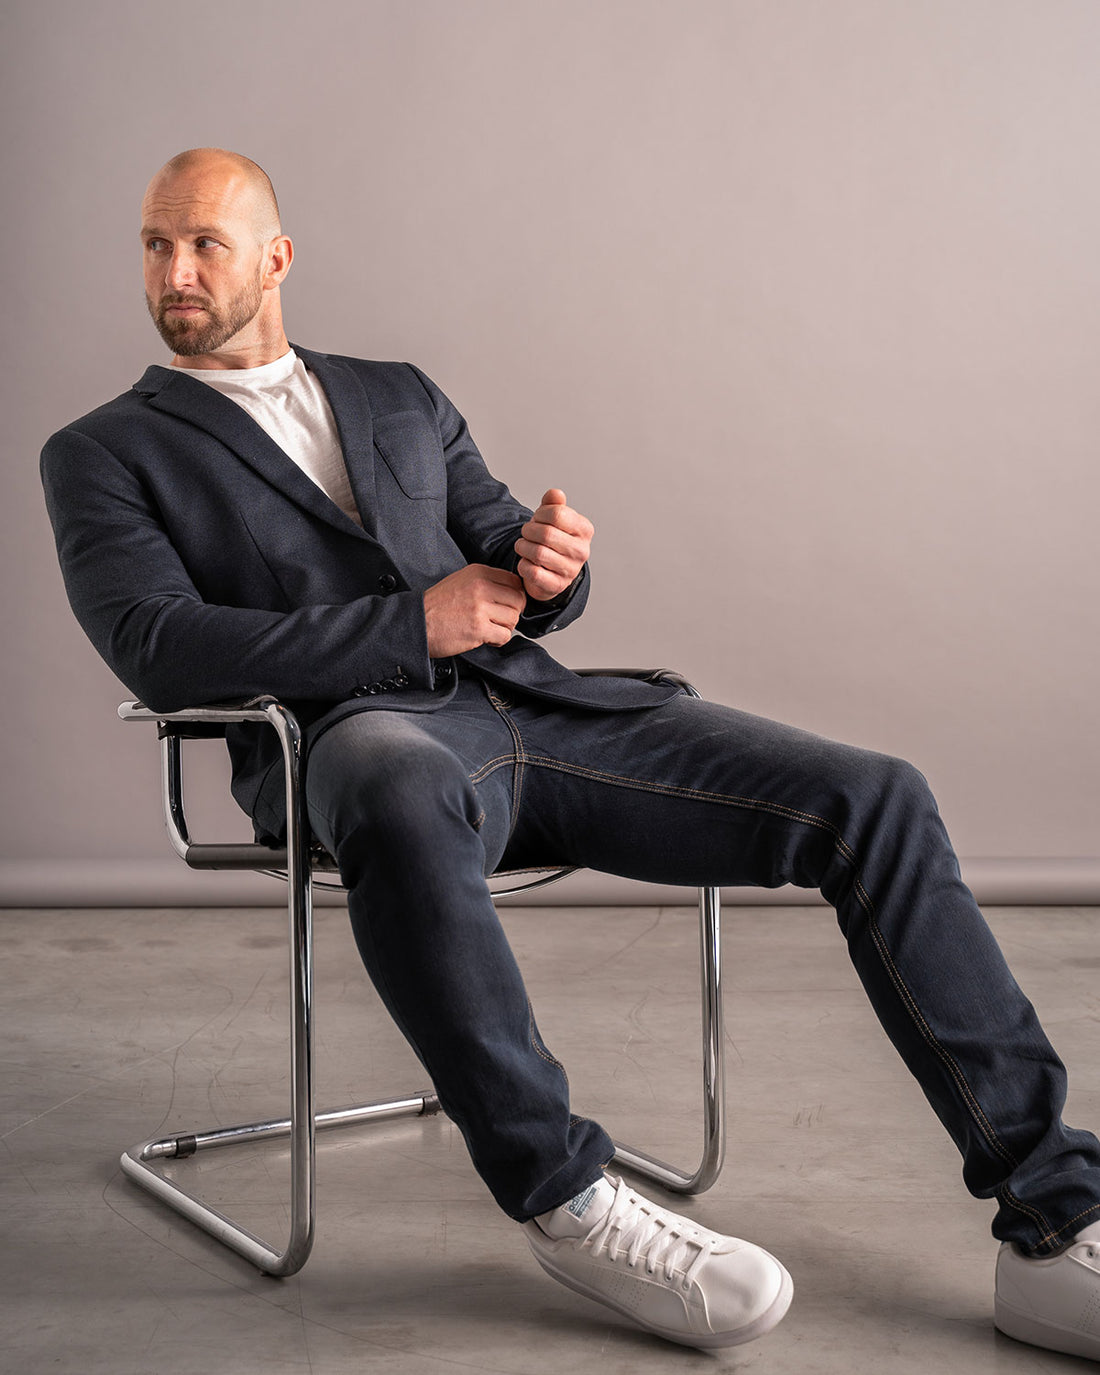 Dressing for the Office: Finding Business-Casual Clothing for Tall Men